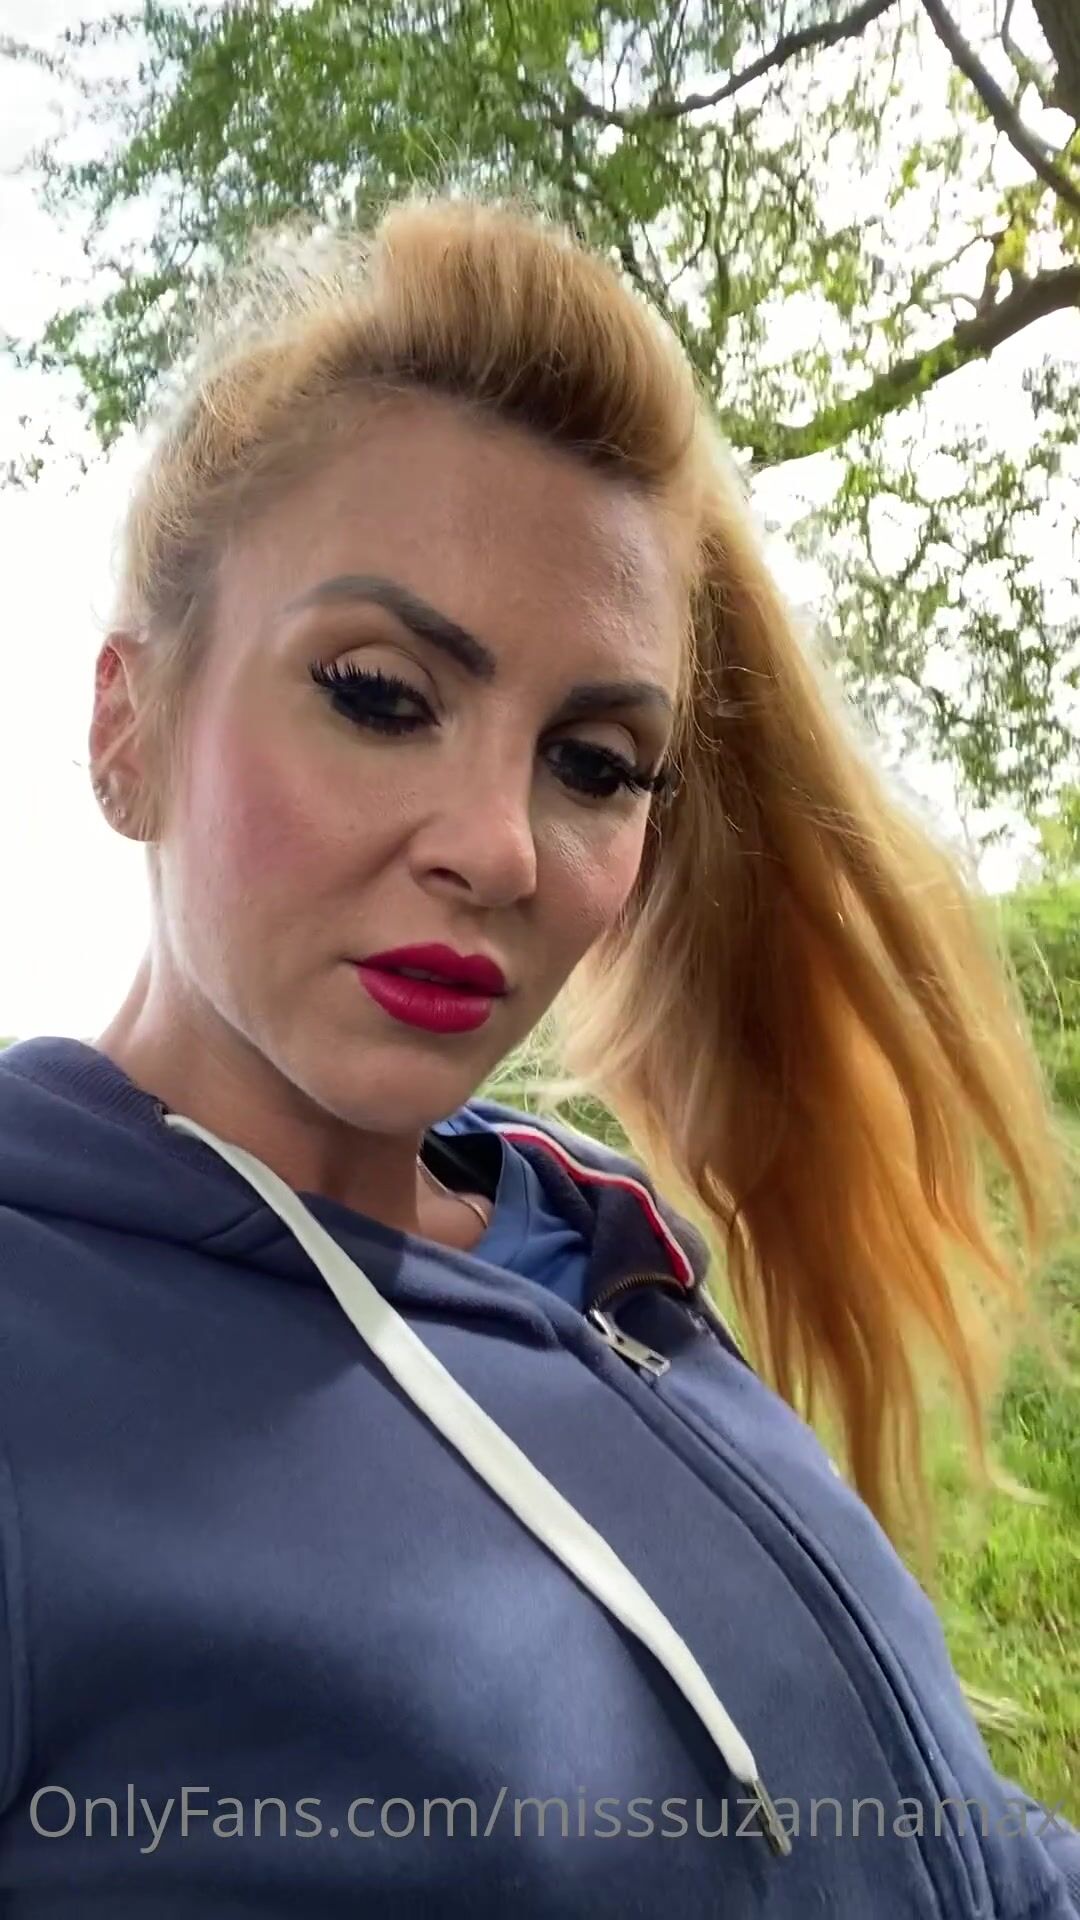 Miss Suzanna Maxwell Aka Misssuzannamax Onlyfans I Just Can’t Get Enough Of Being Naughty